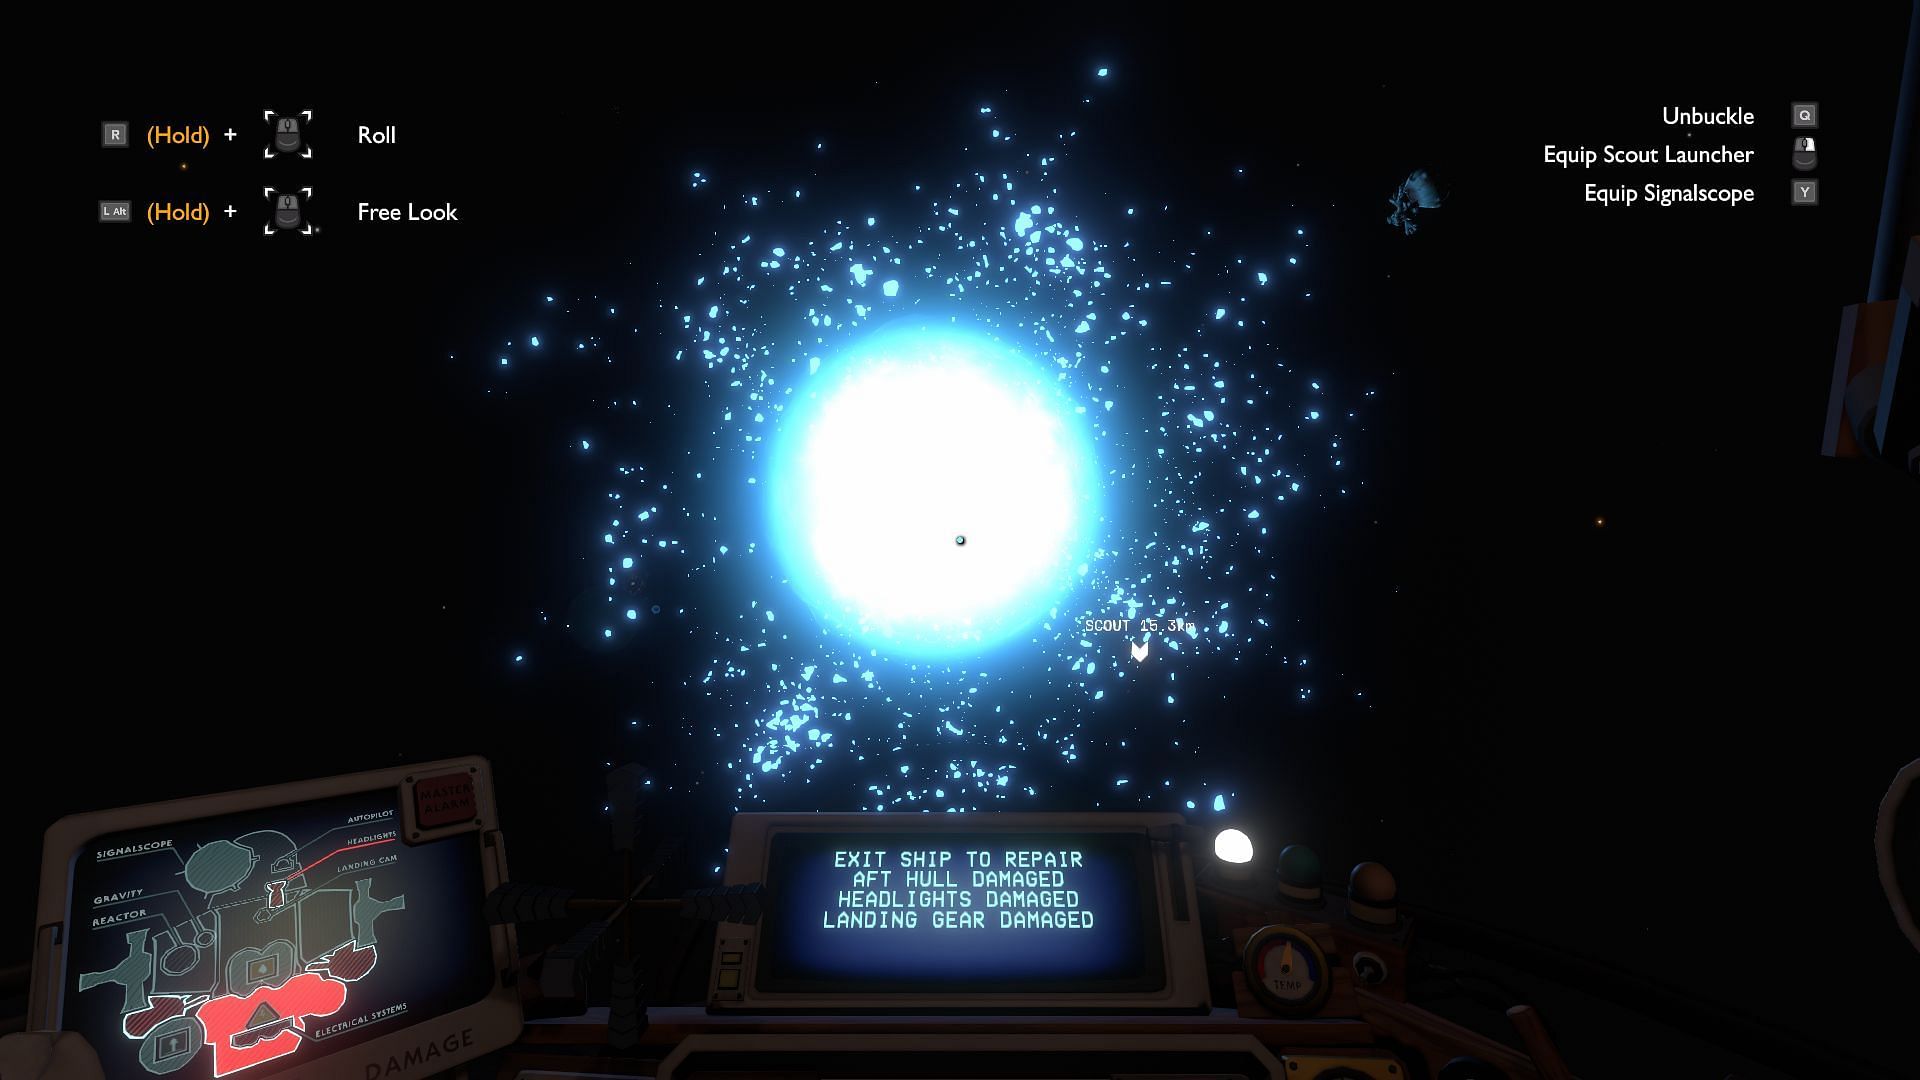 The Erhabenheit of space: The sublime in Outer Wilds